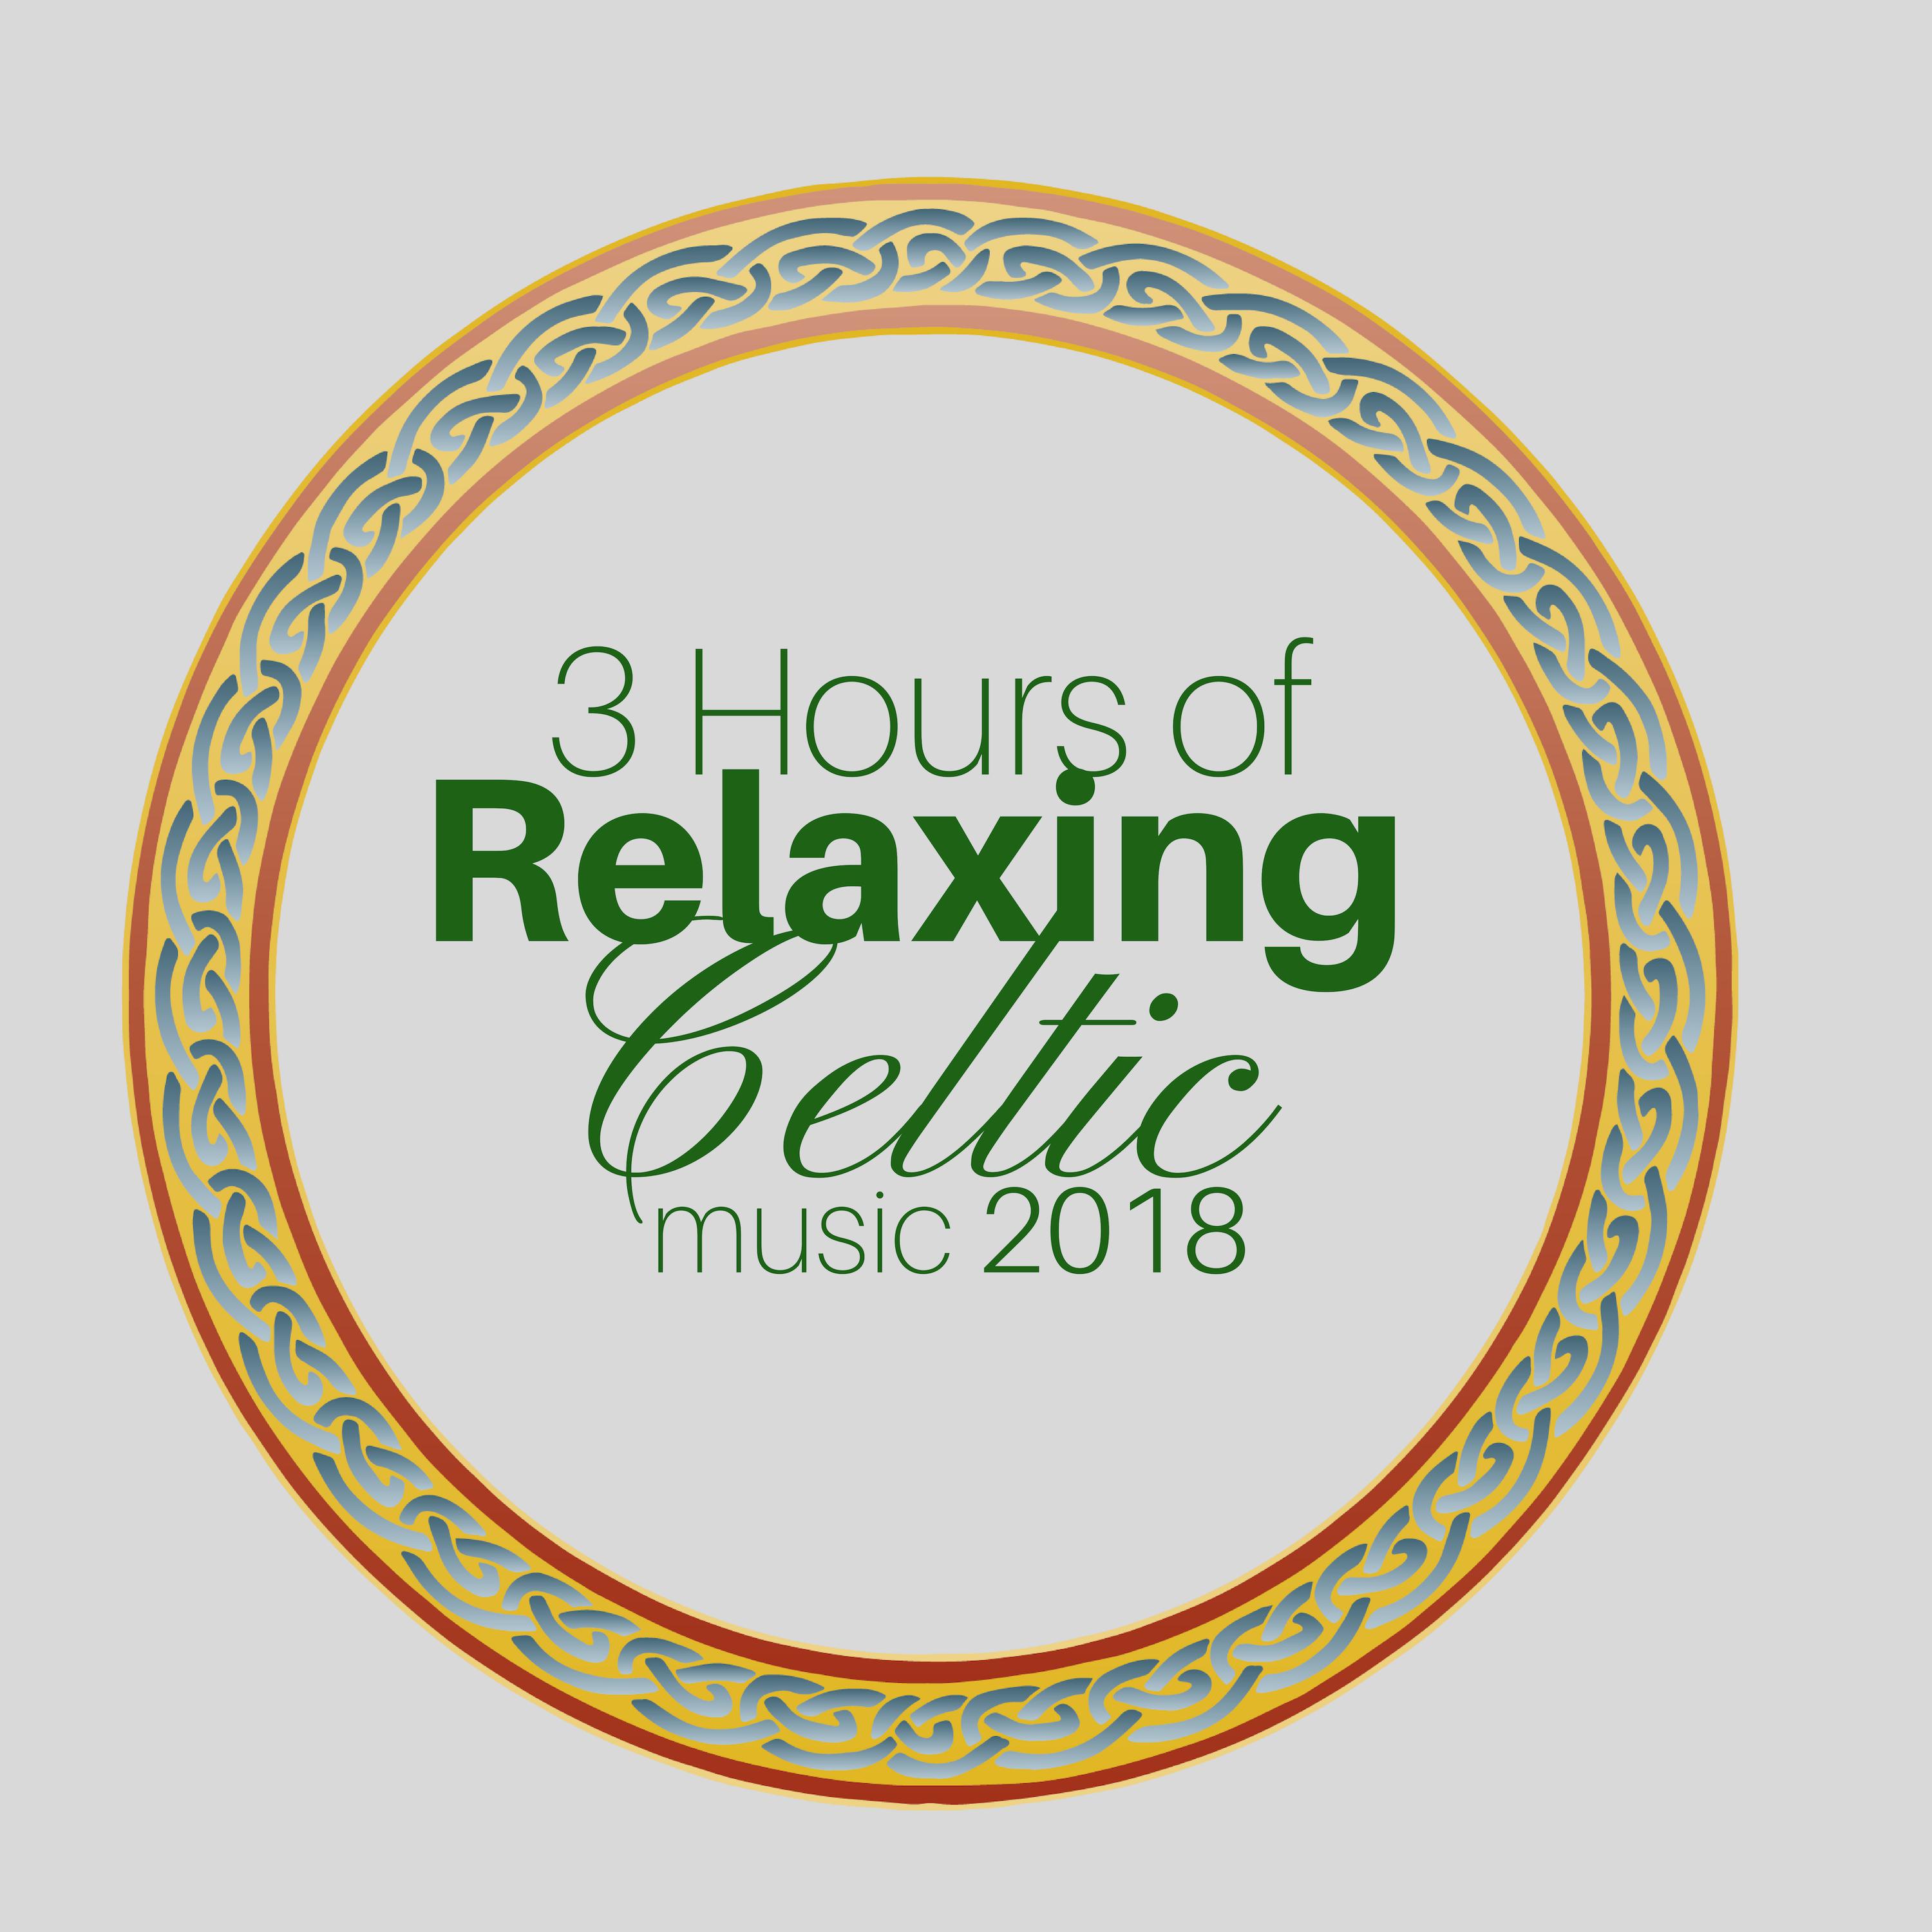 3 Hours of Relaxing Celtic Music 2018